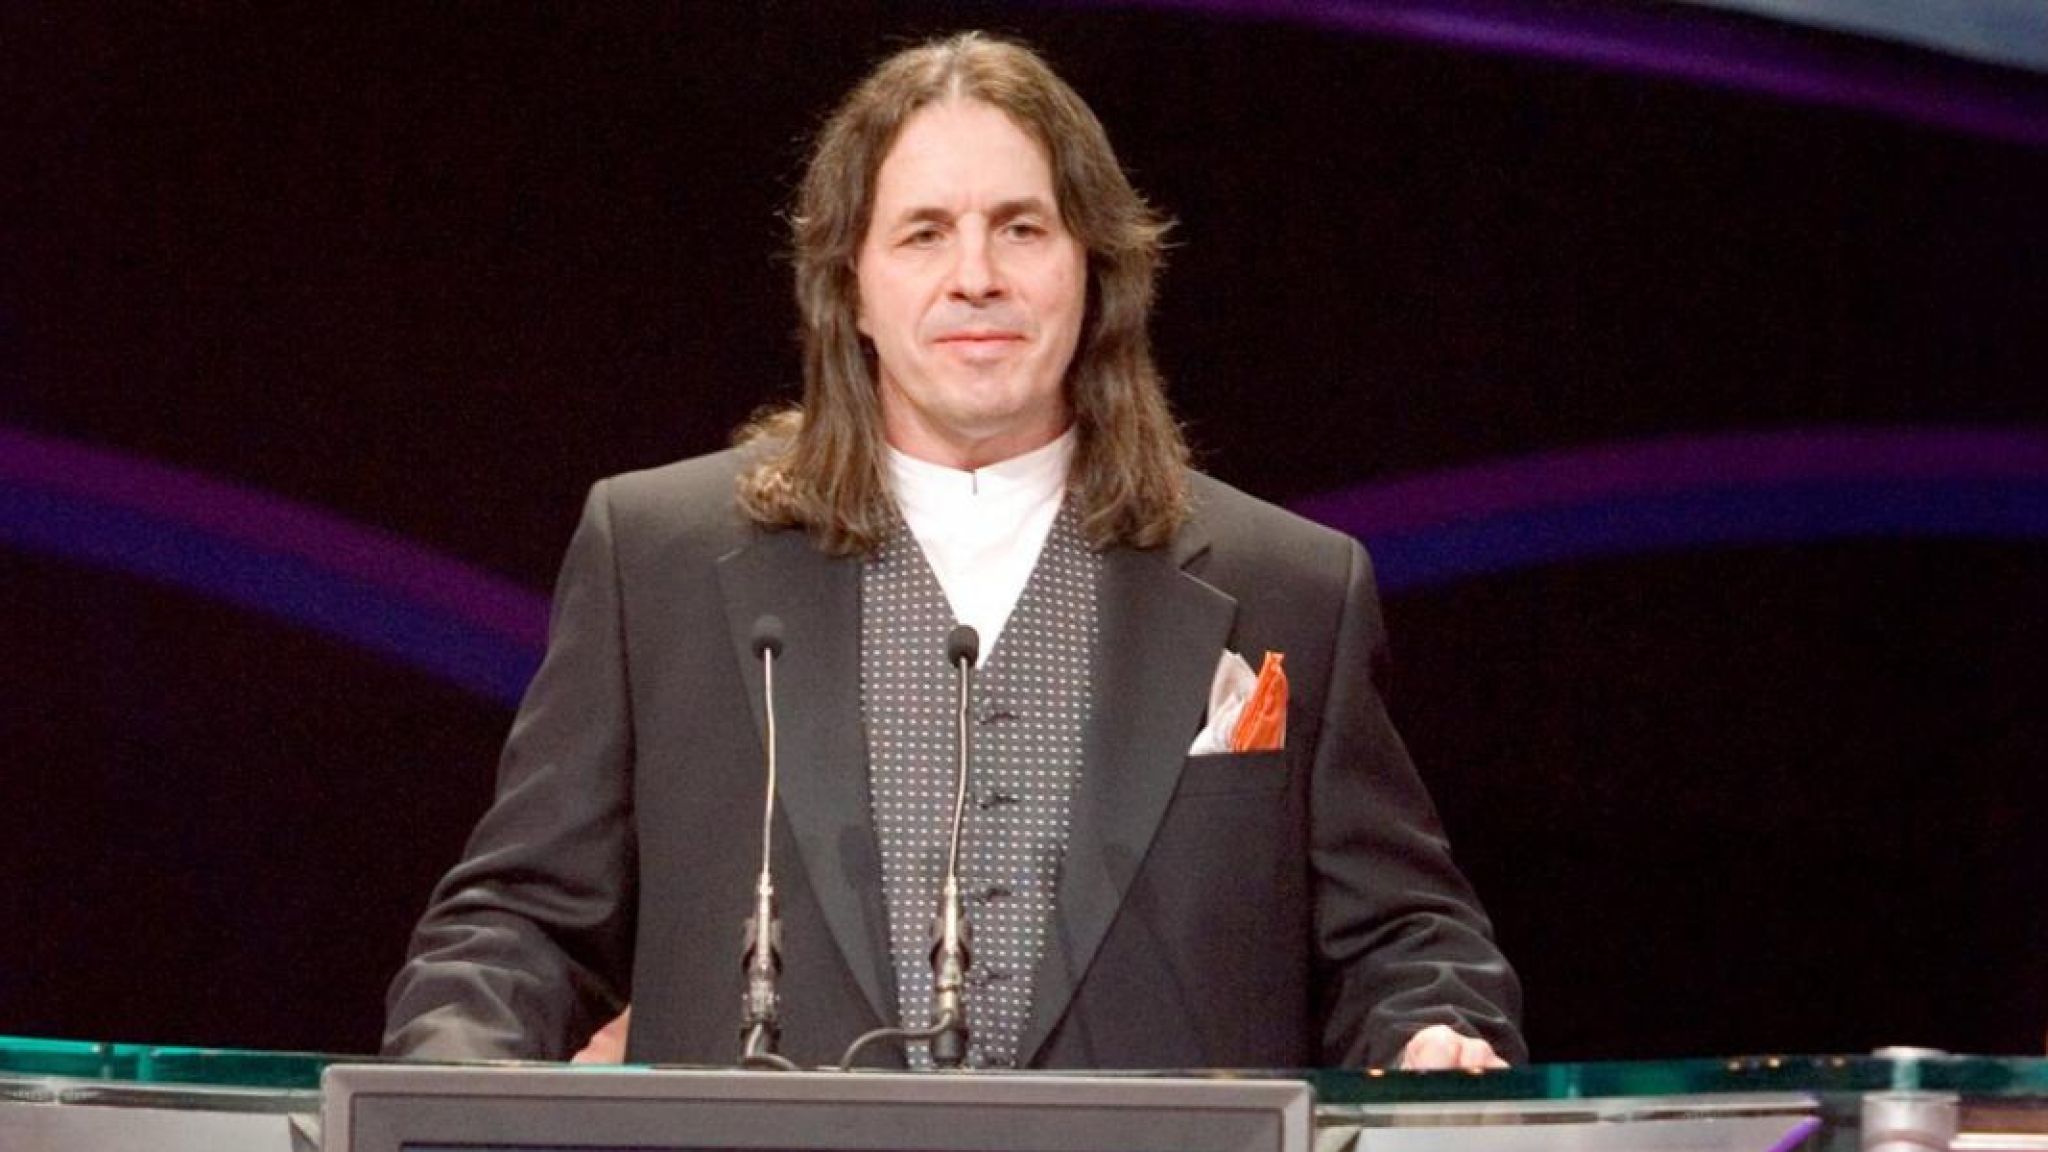 Bret Hart Was Inducted Into The Hall Of Fame In 2006 - Bret Hart Wwe Hall Of Fame 2006 - HD Wallpaper 